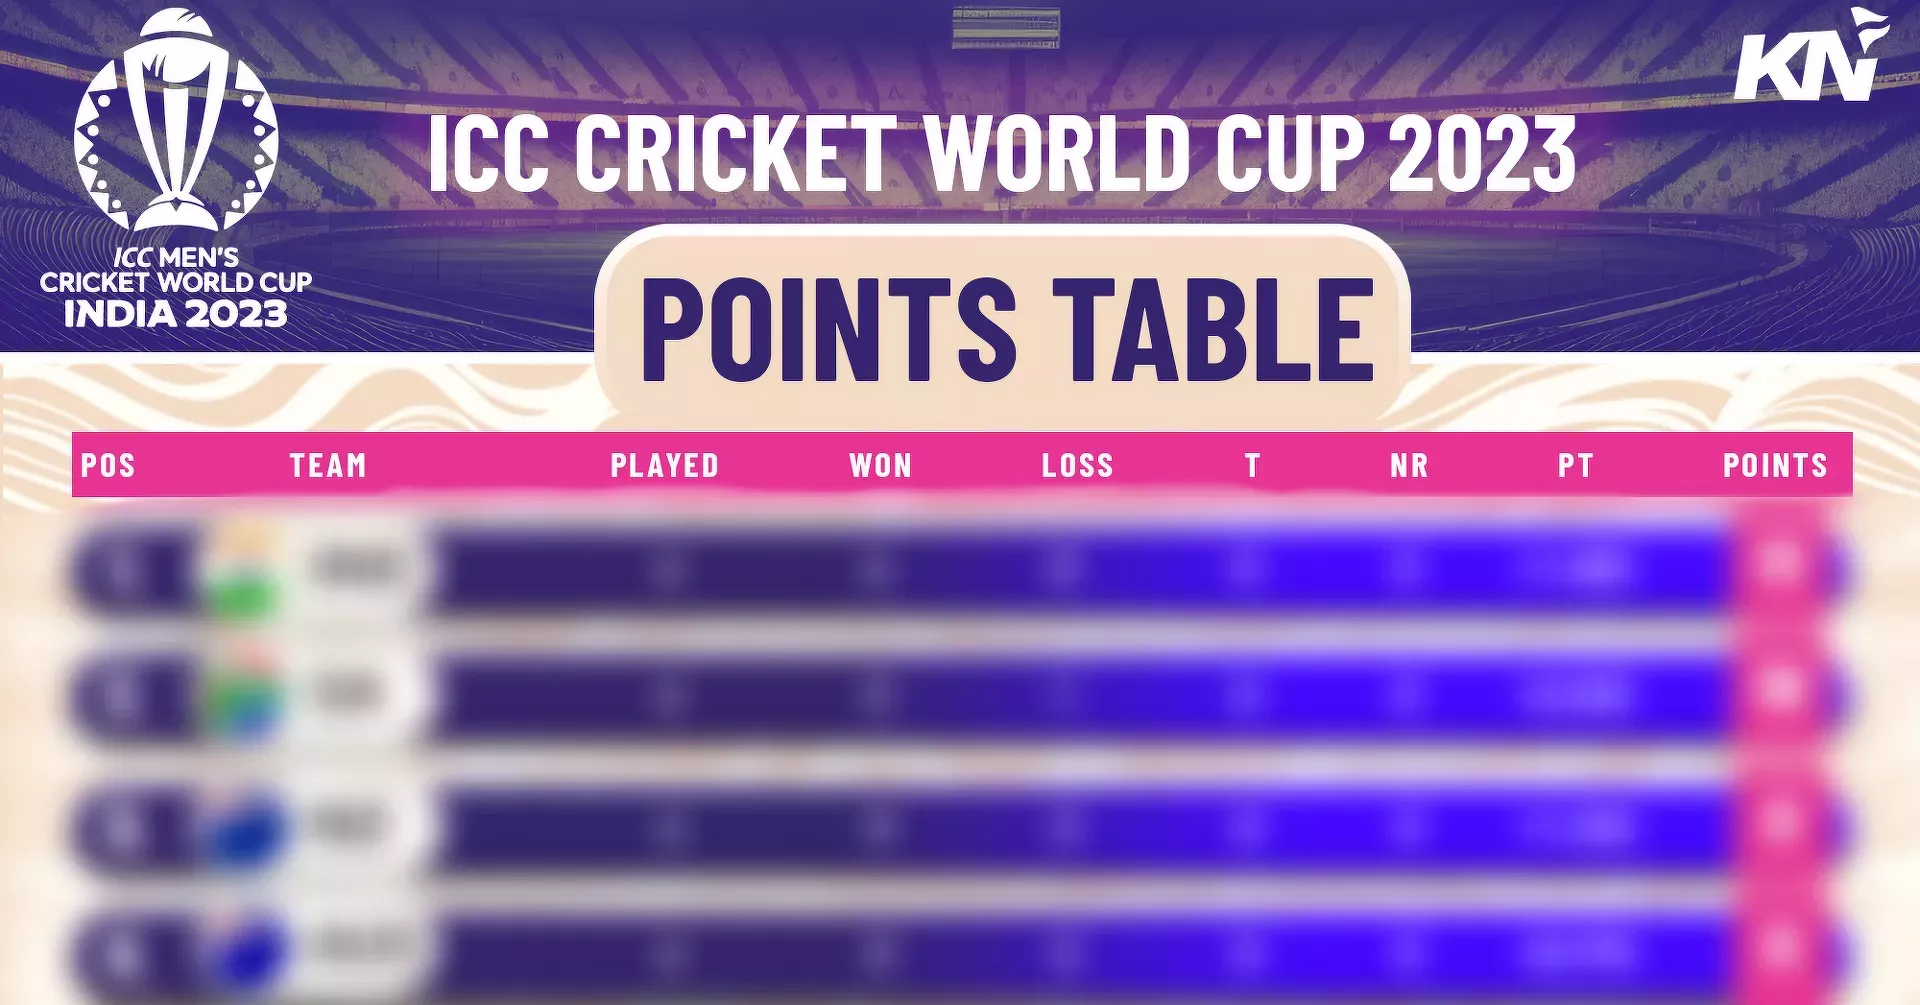 ICC Cricket World Cup 2023 Points Table, Most Runs, Most Wickets, after Match 31, PAK vs BAN